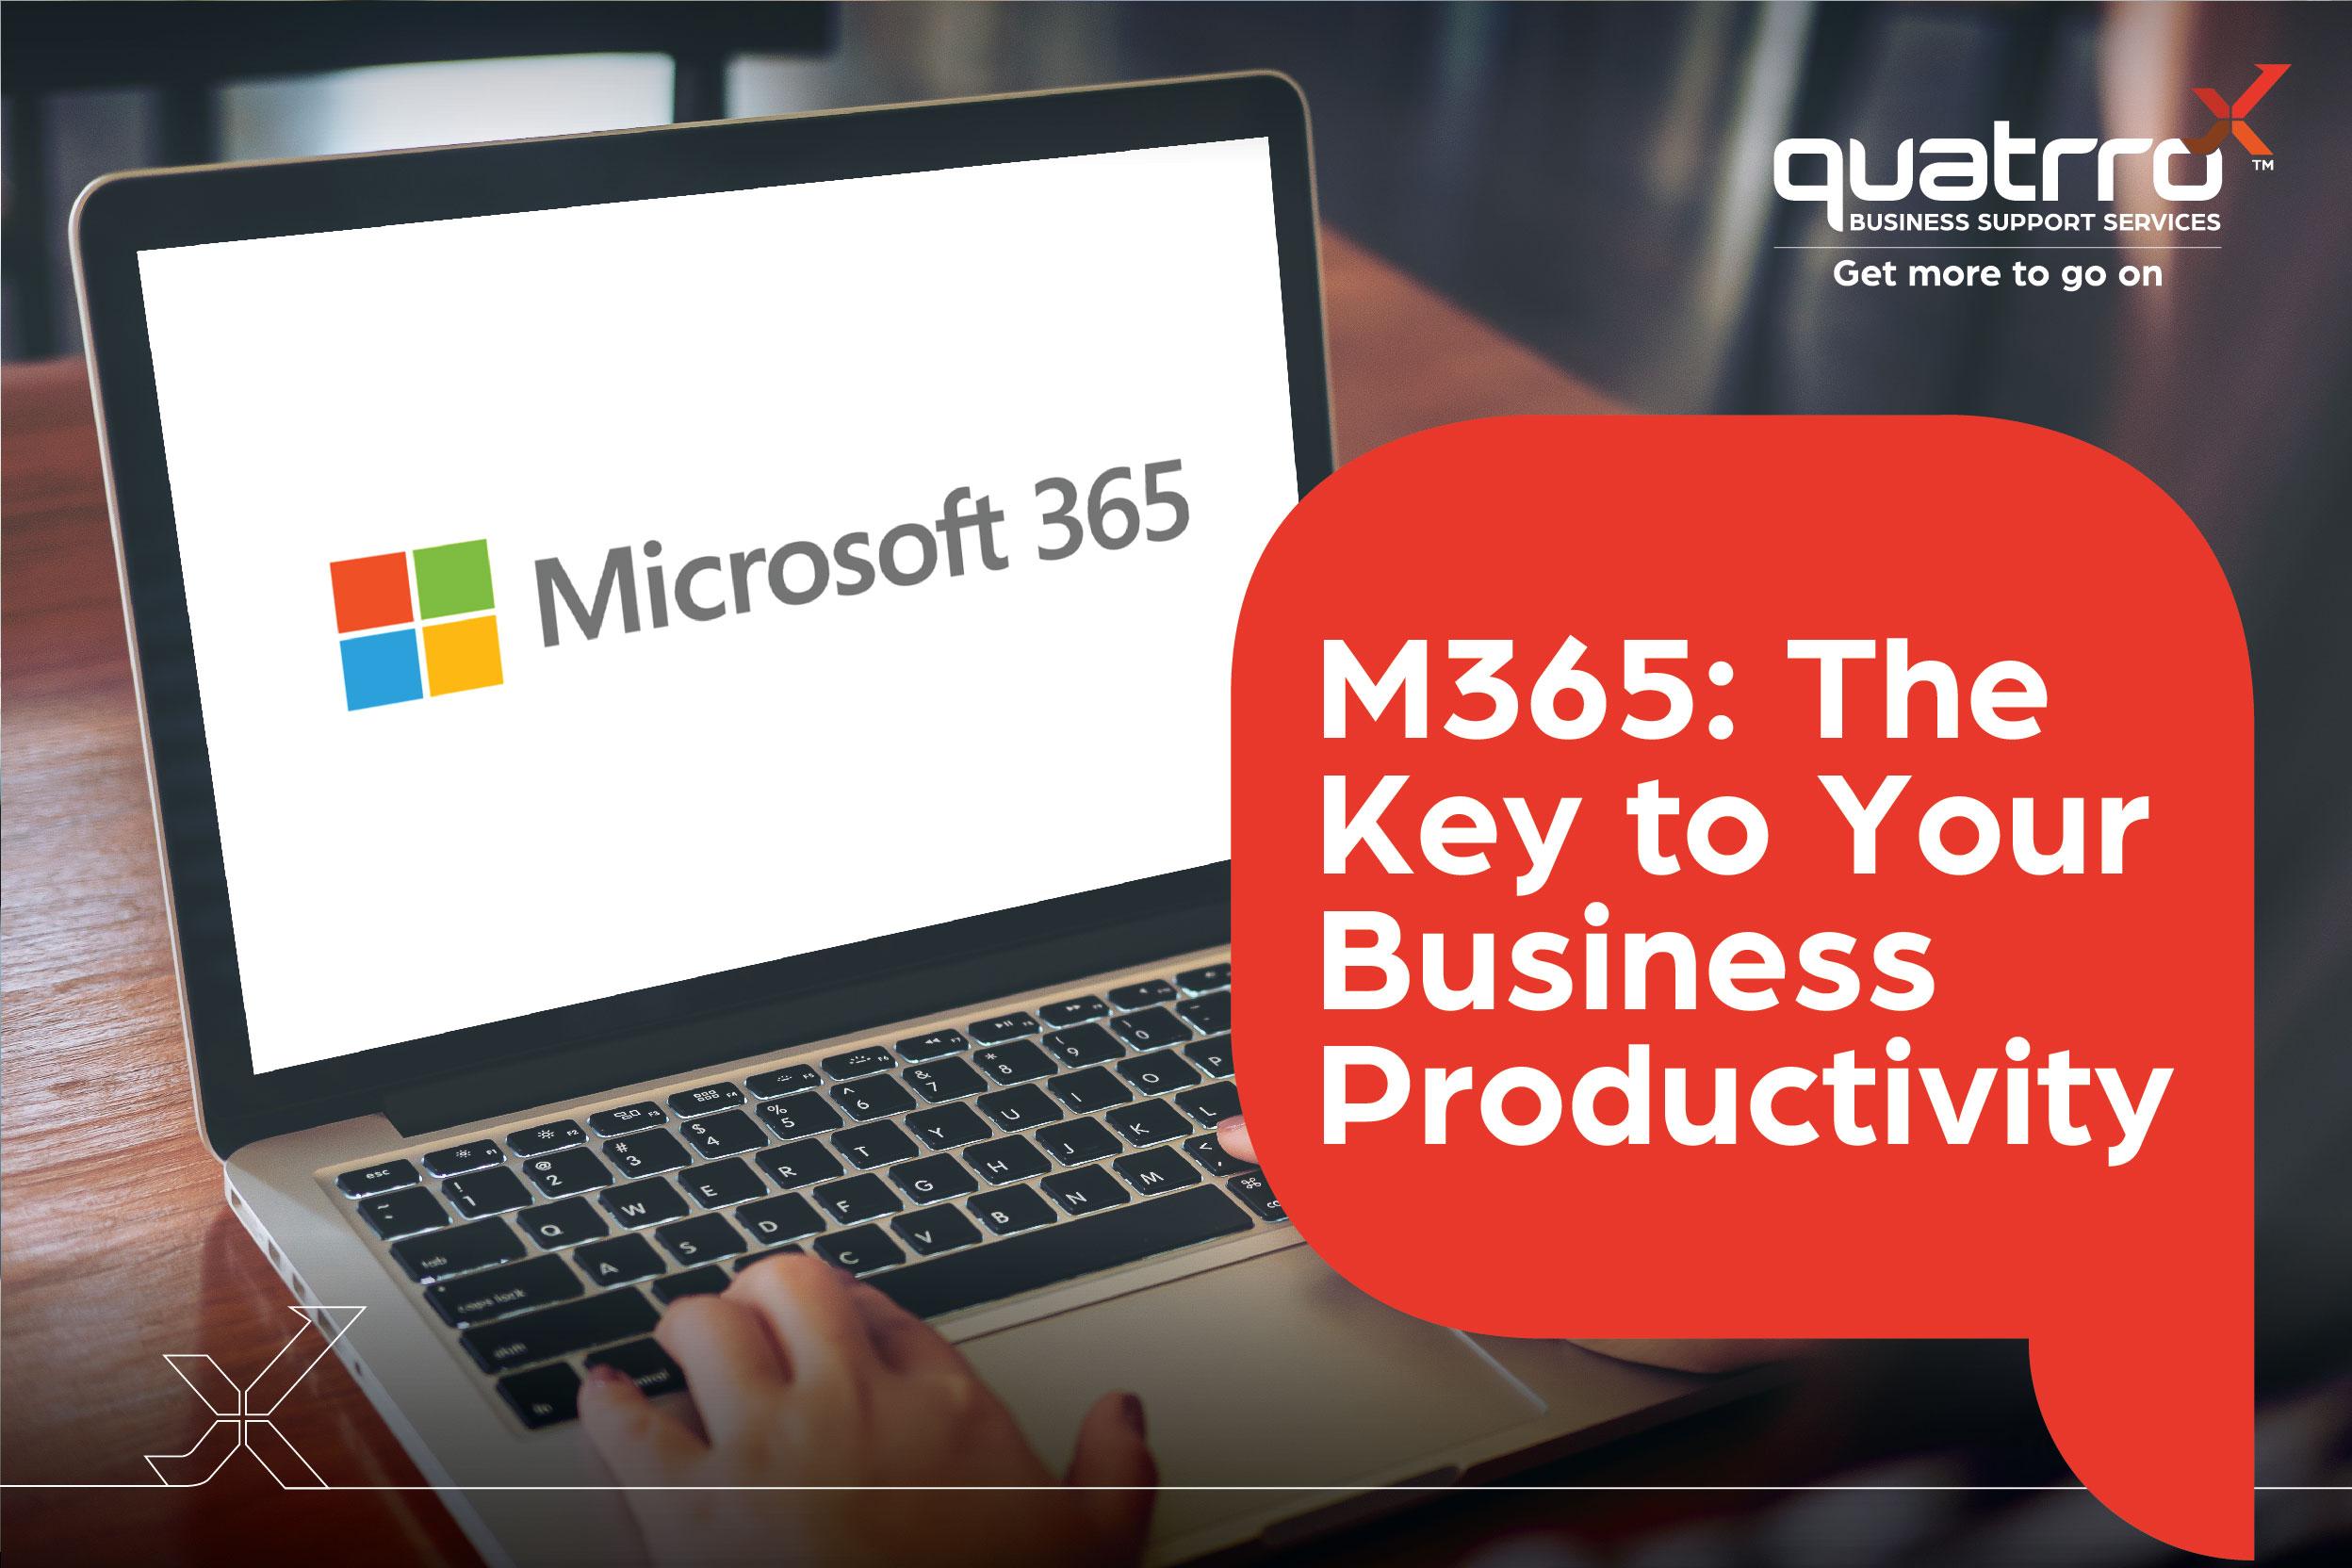 Learn how M365 can help propel your business to success by ...